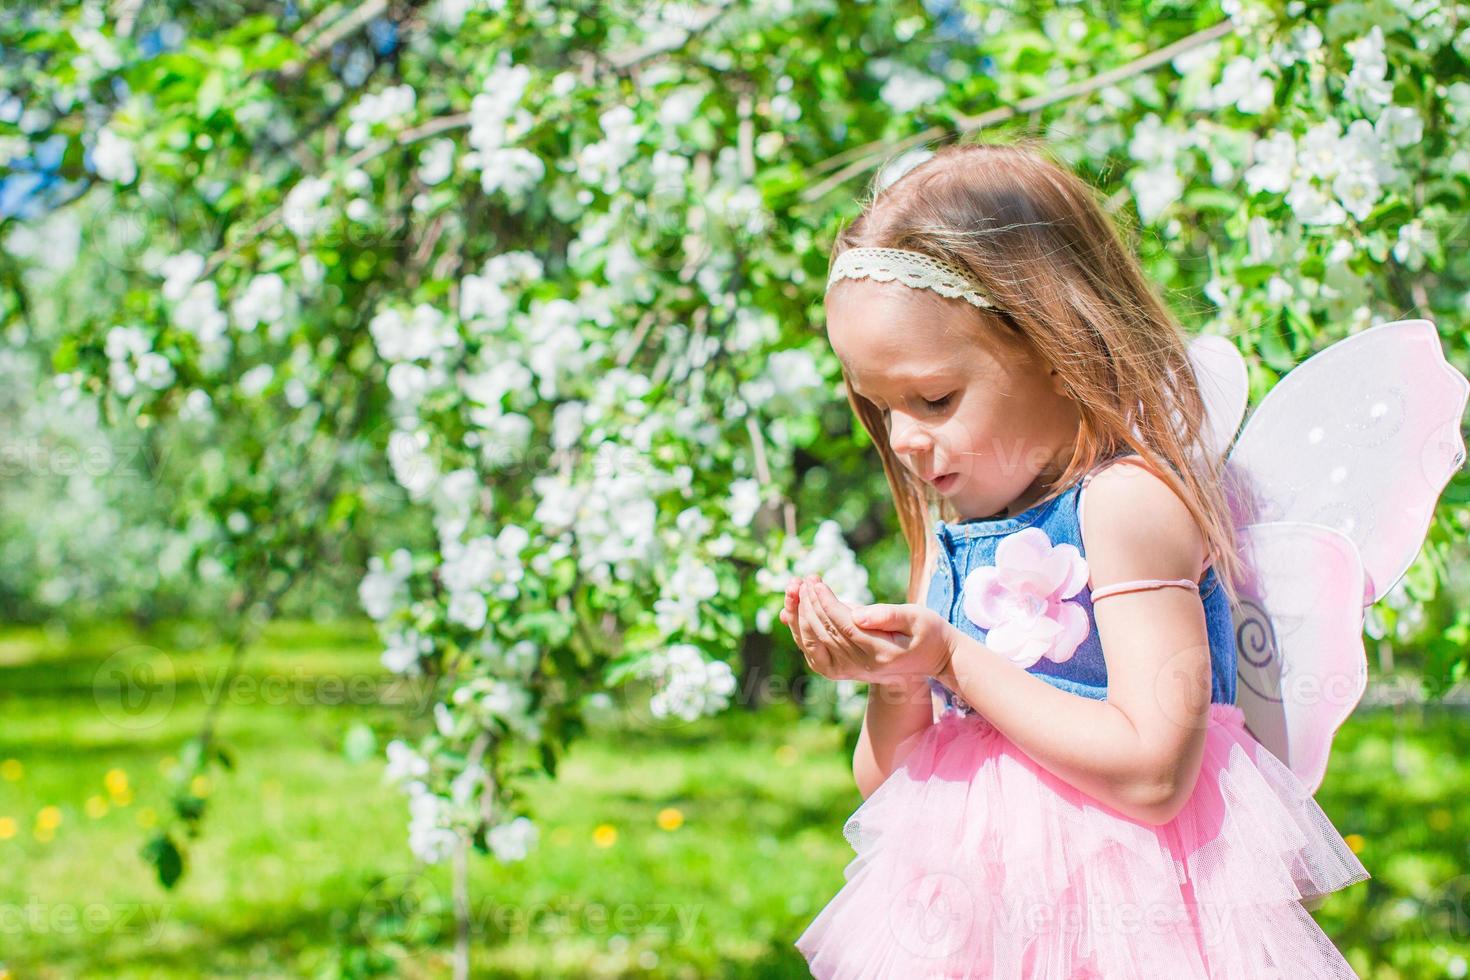 Adorable little girl in blossoming apple tree garden photo